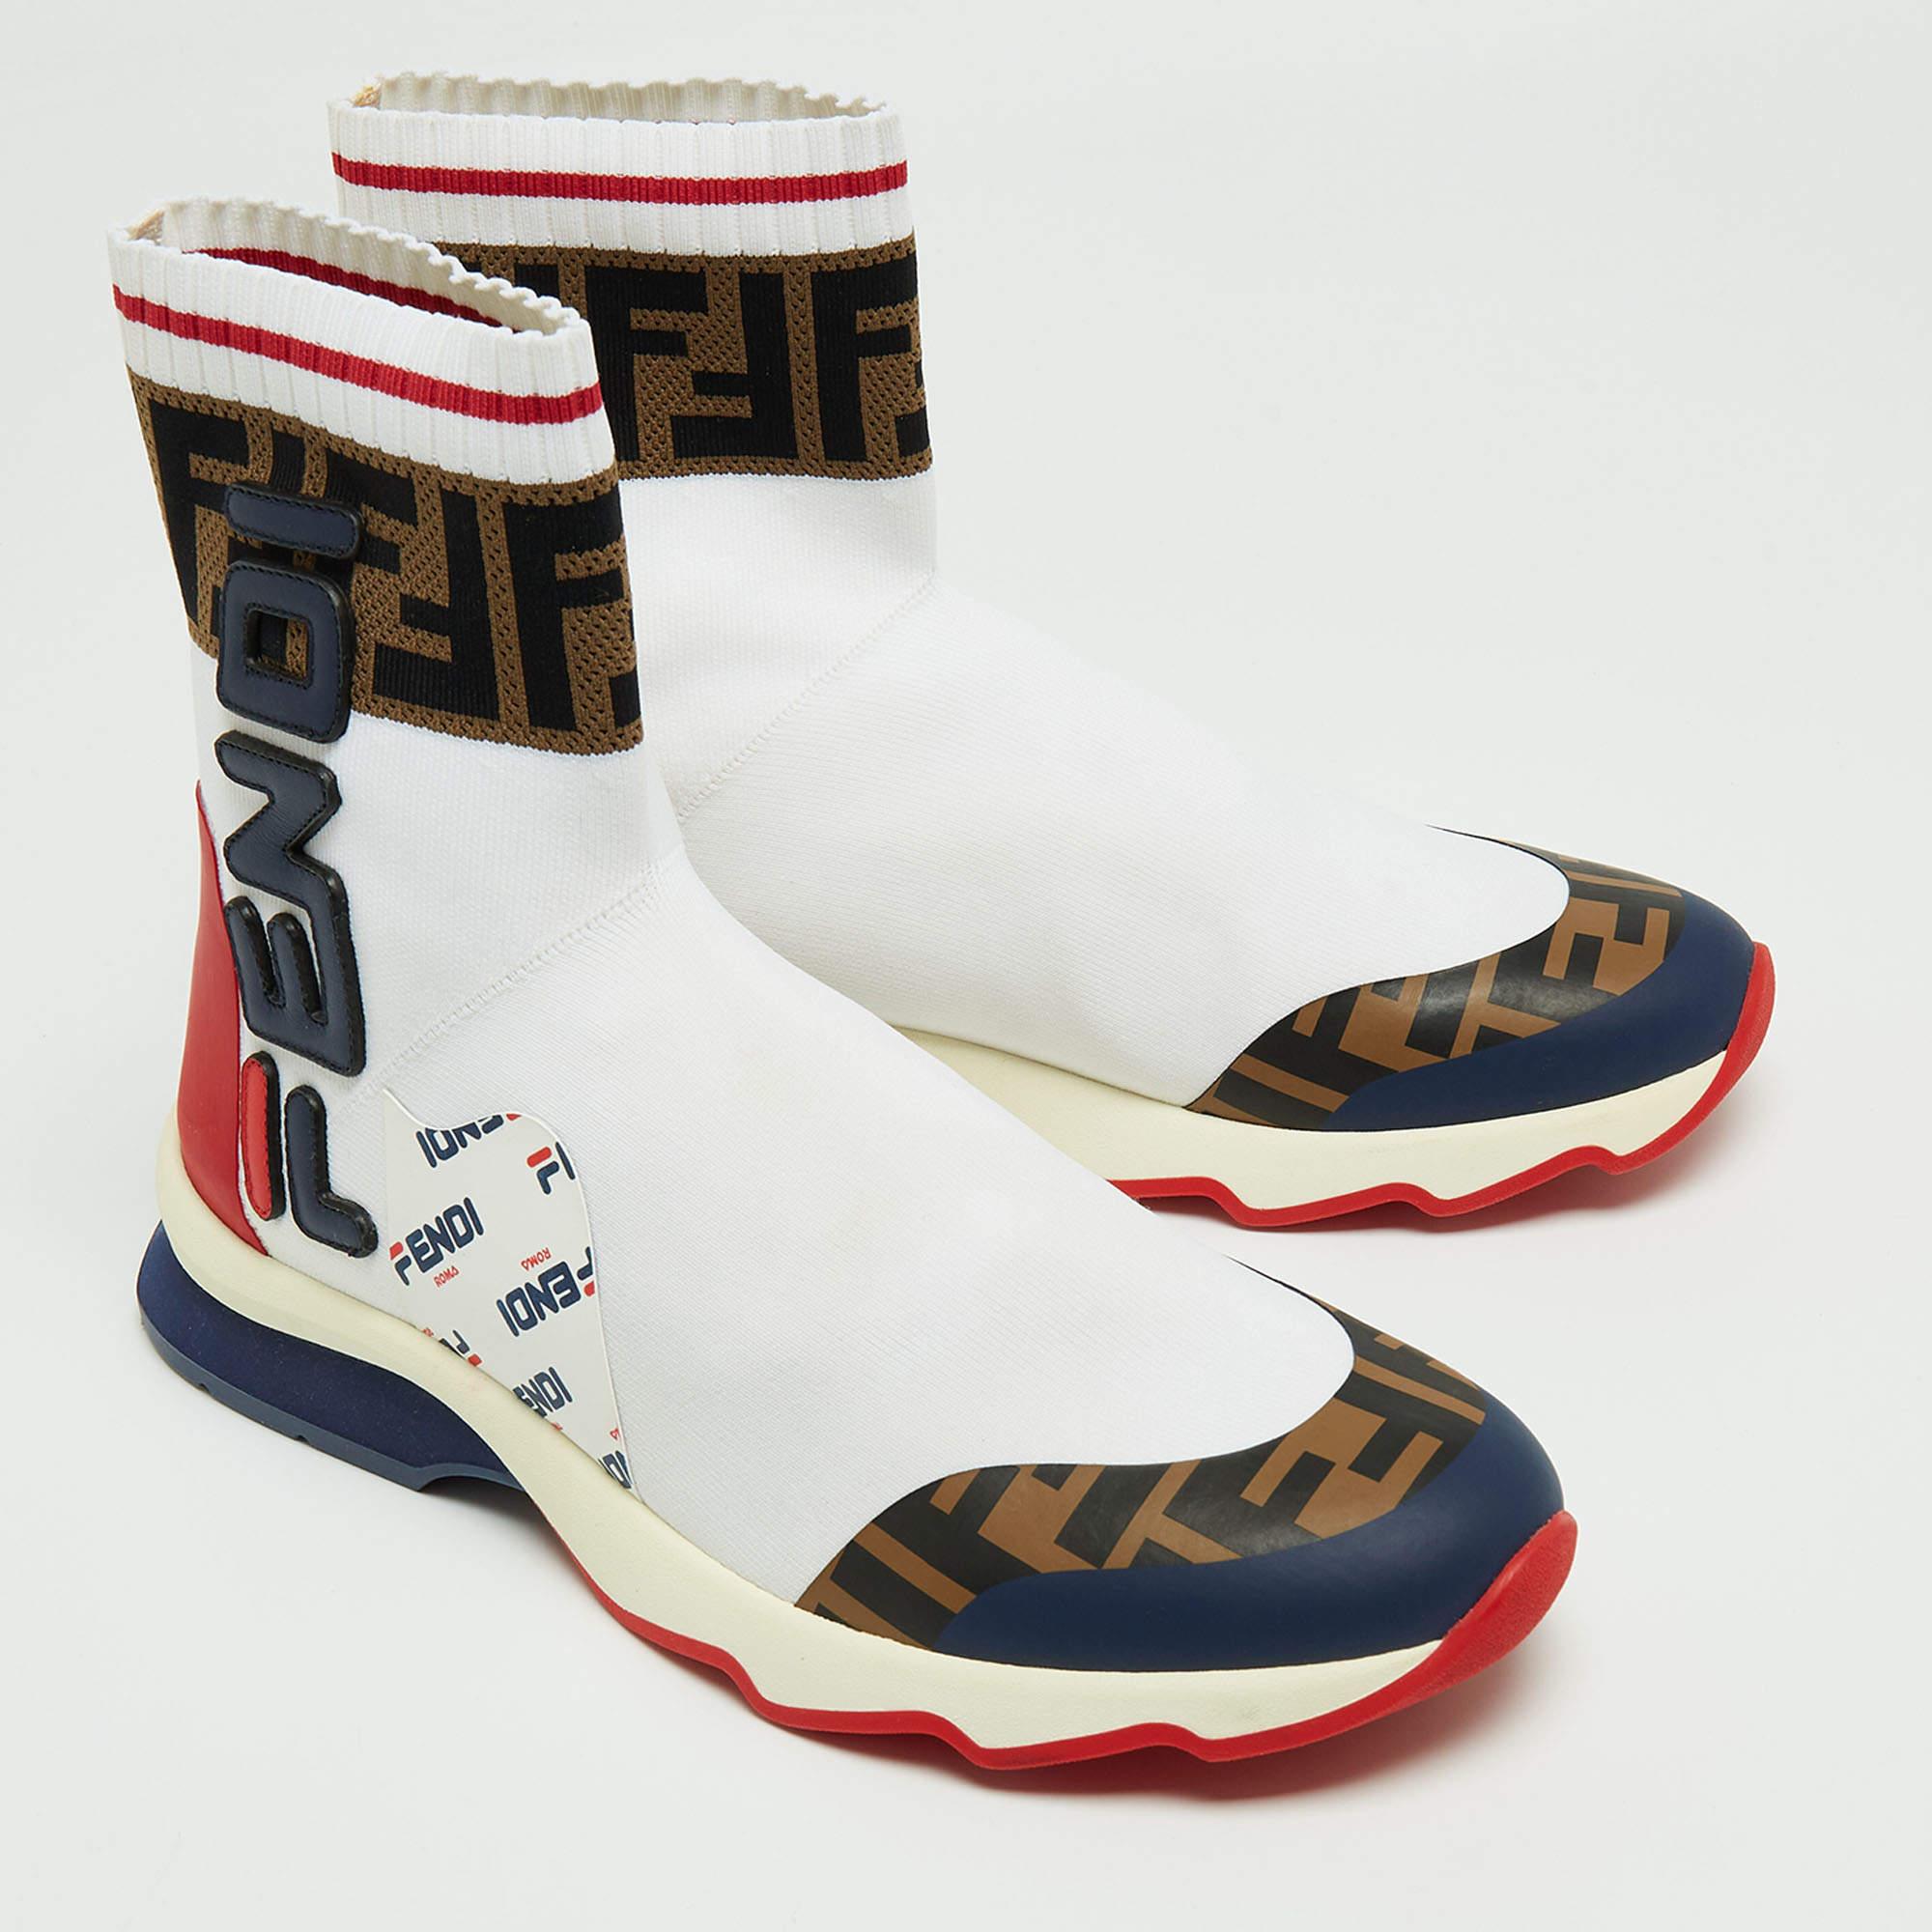 Women's Fendi x Fila Tricolor Knit Fabric and Leather Mania Sock Sneakers Size 38 For Sale